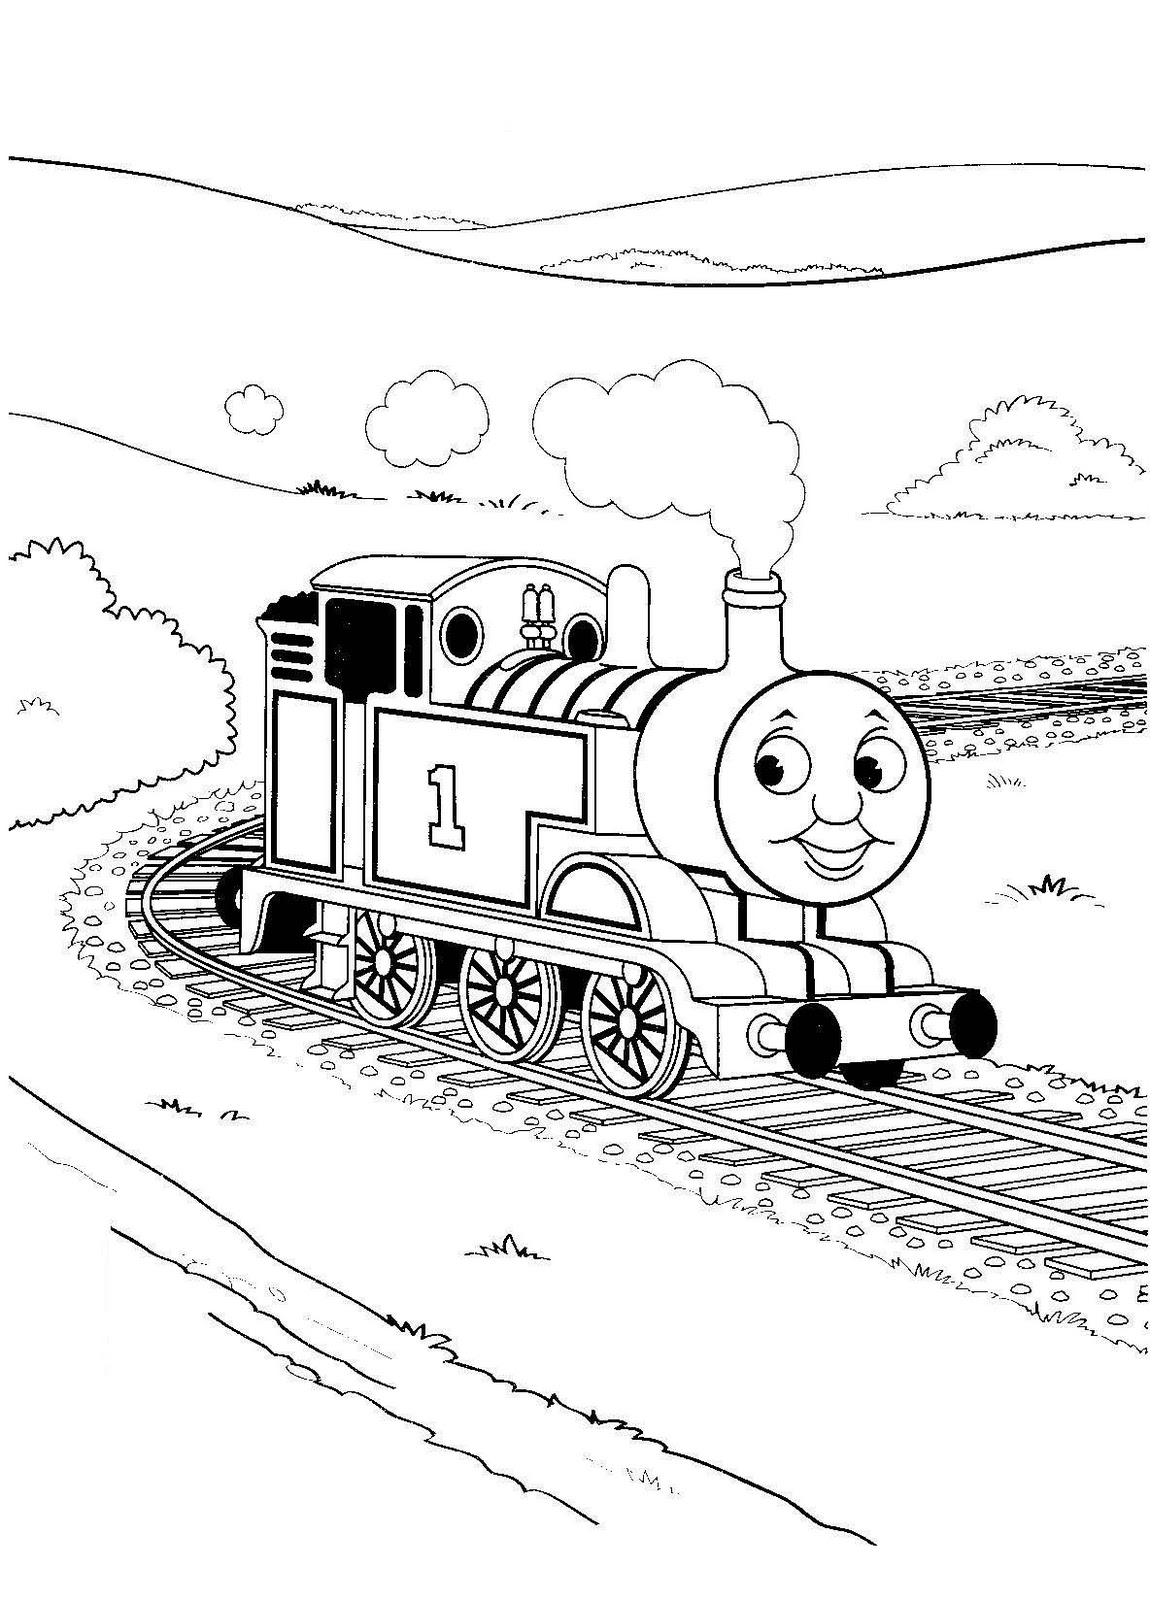 Coloring Pages for everyone: Thomas the Tank Engine